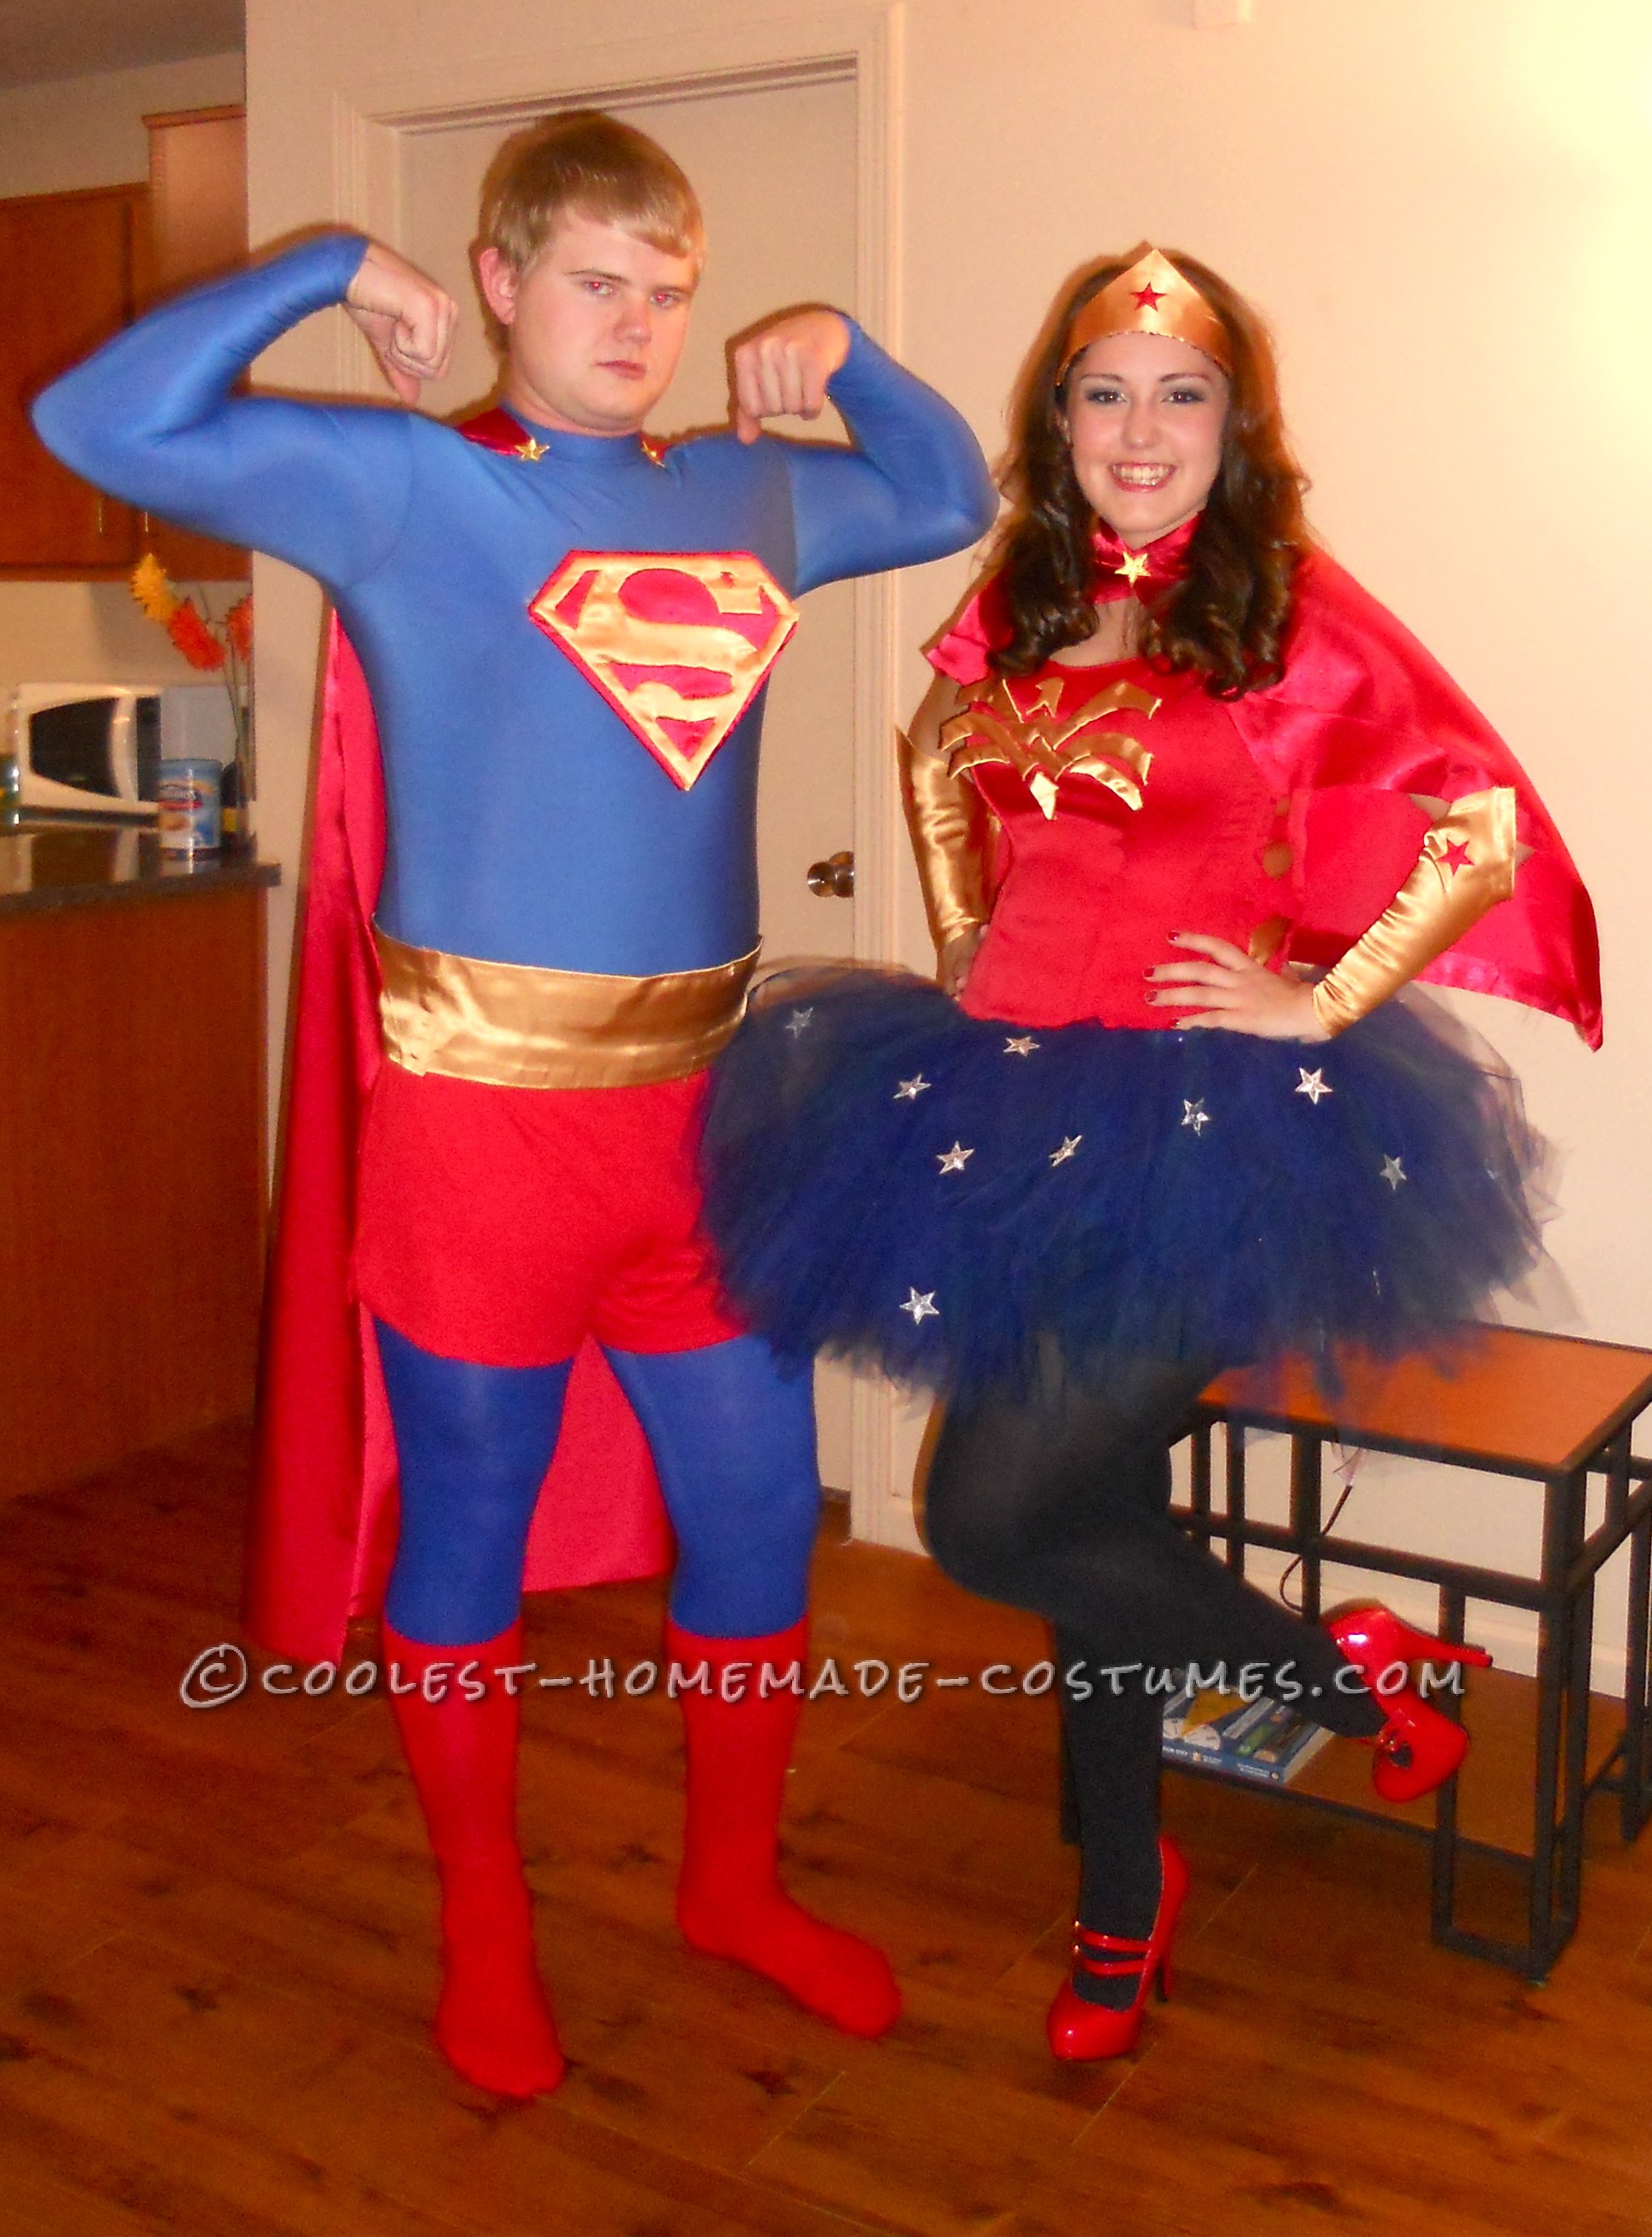 Coolest Homemade Superman and Wonder Woman Couples Halloween Costume